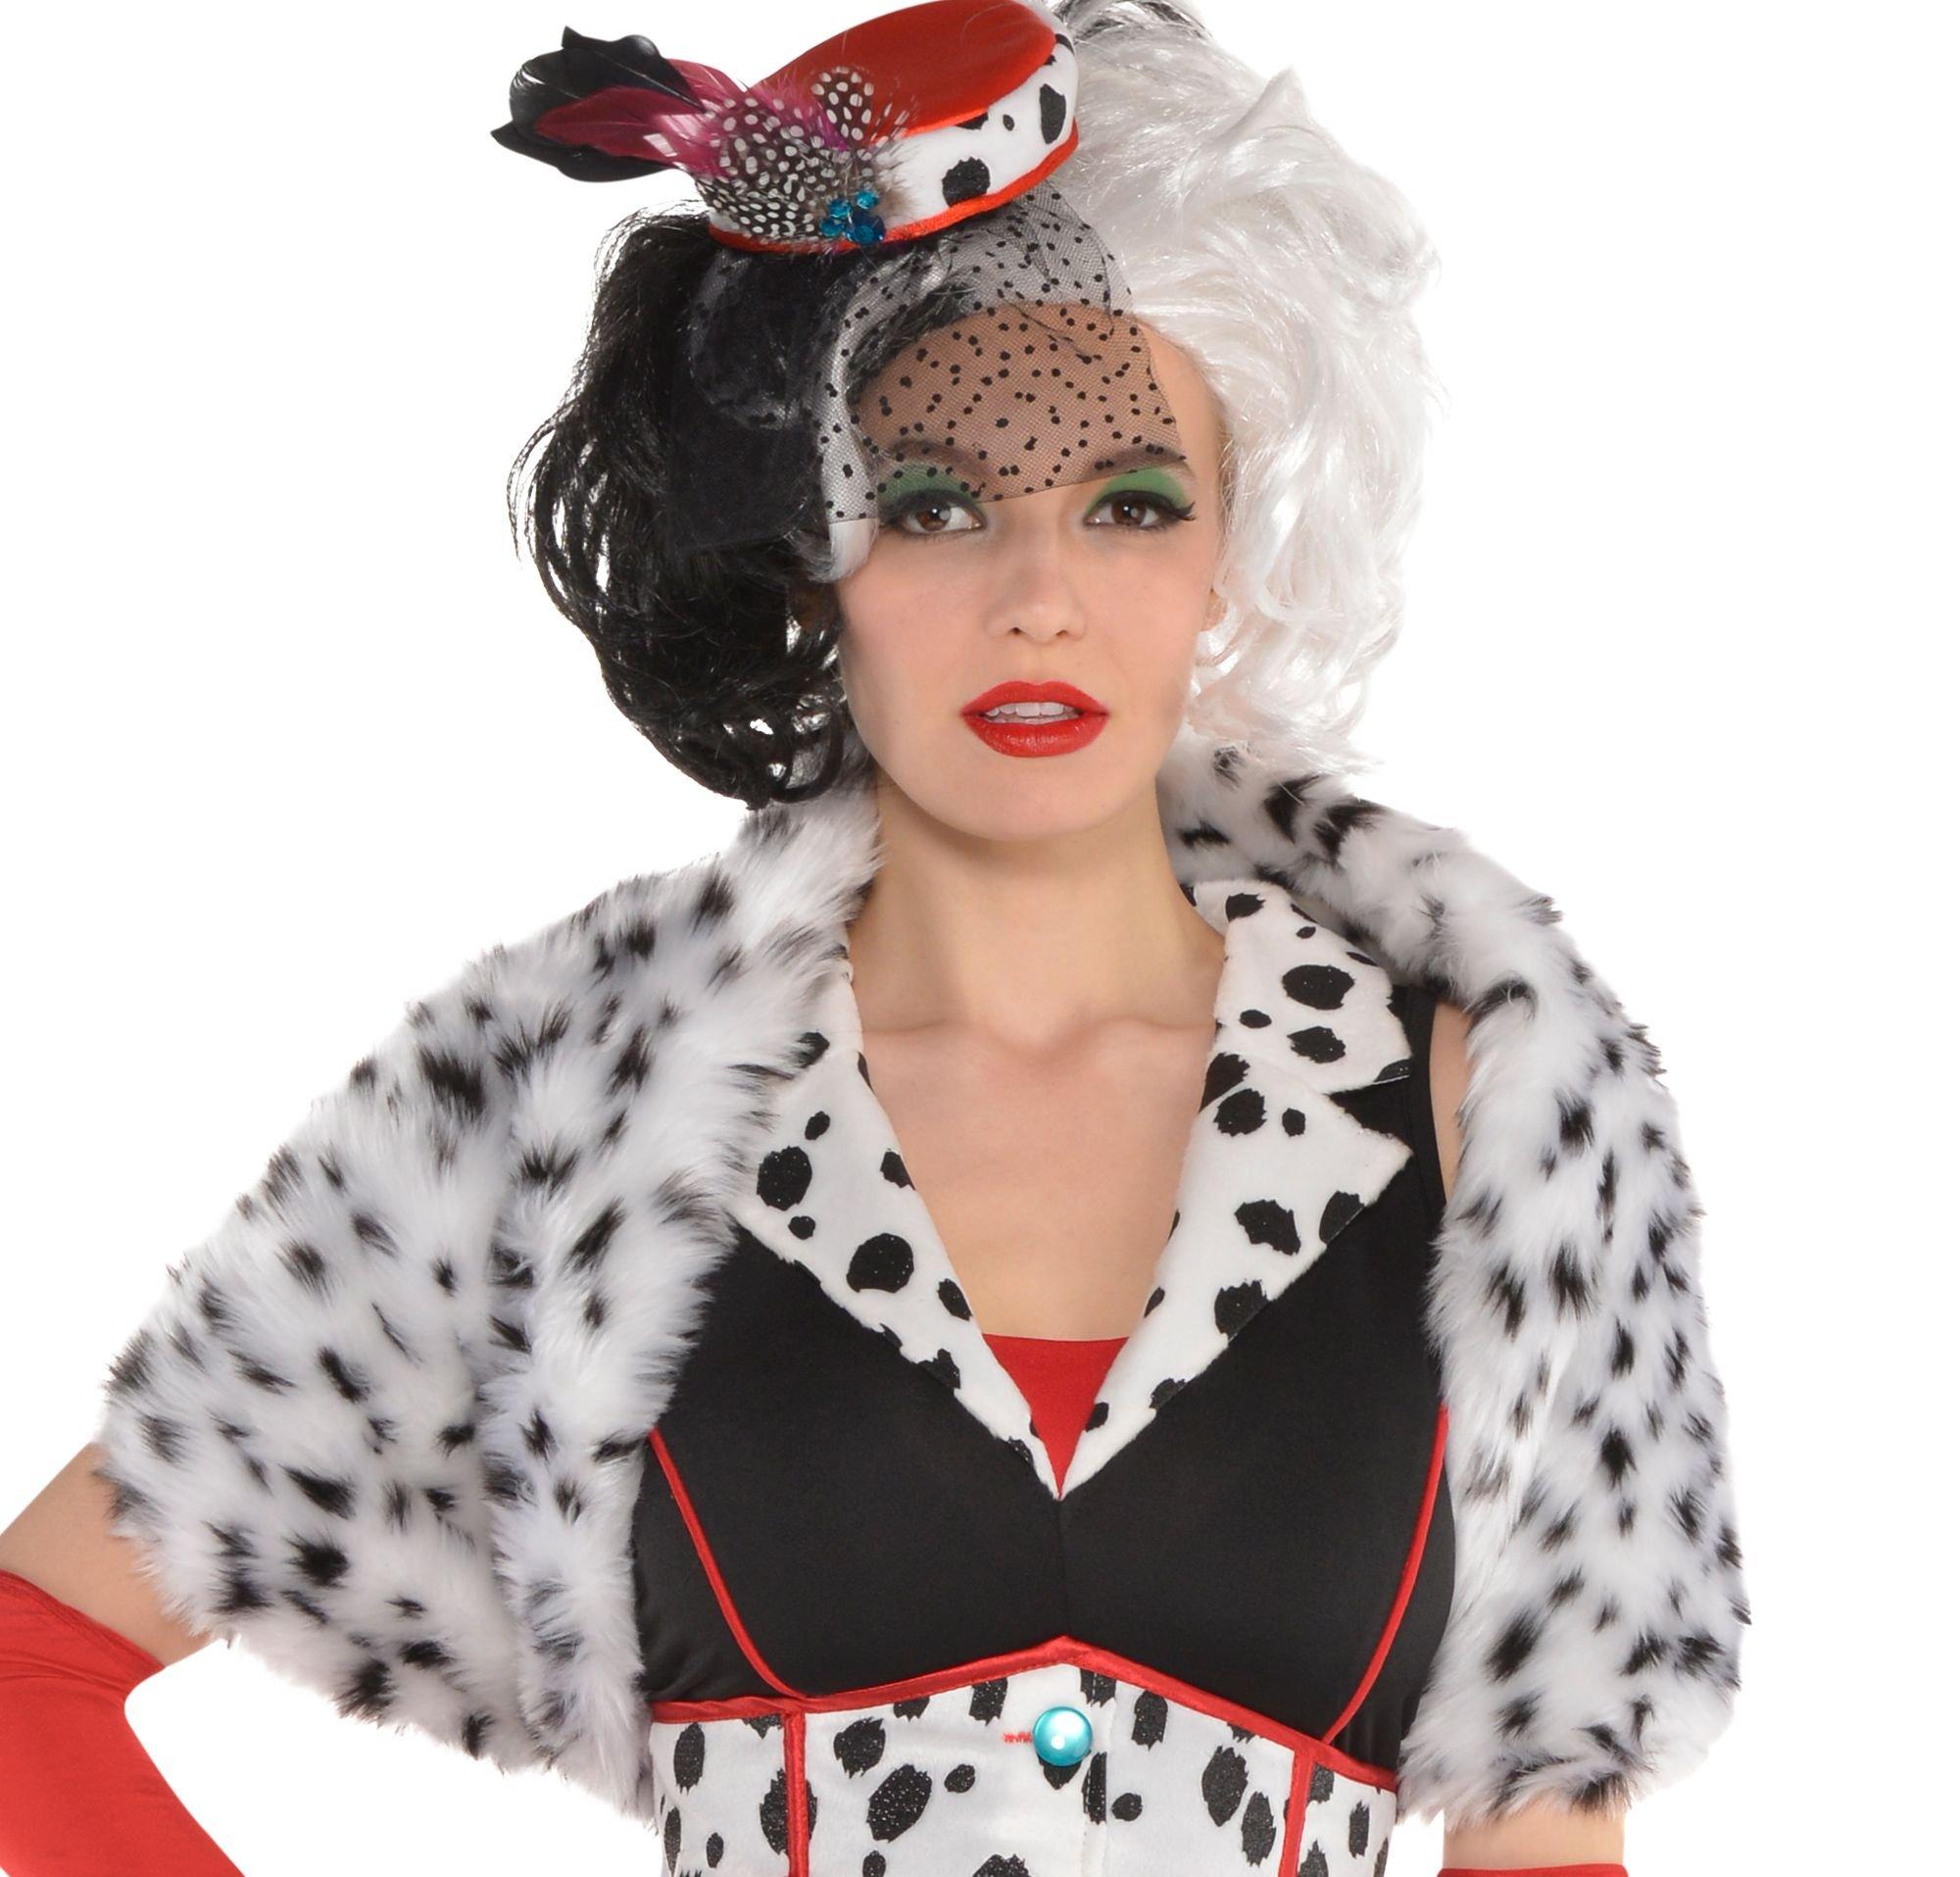 67-year-old woman's Cruella de Vil cosplay is flawless and terrifying -  Culture